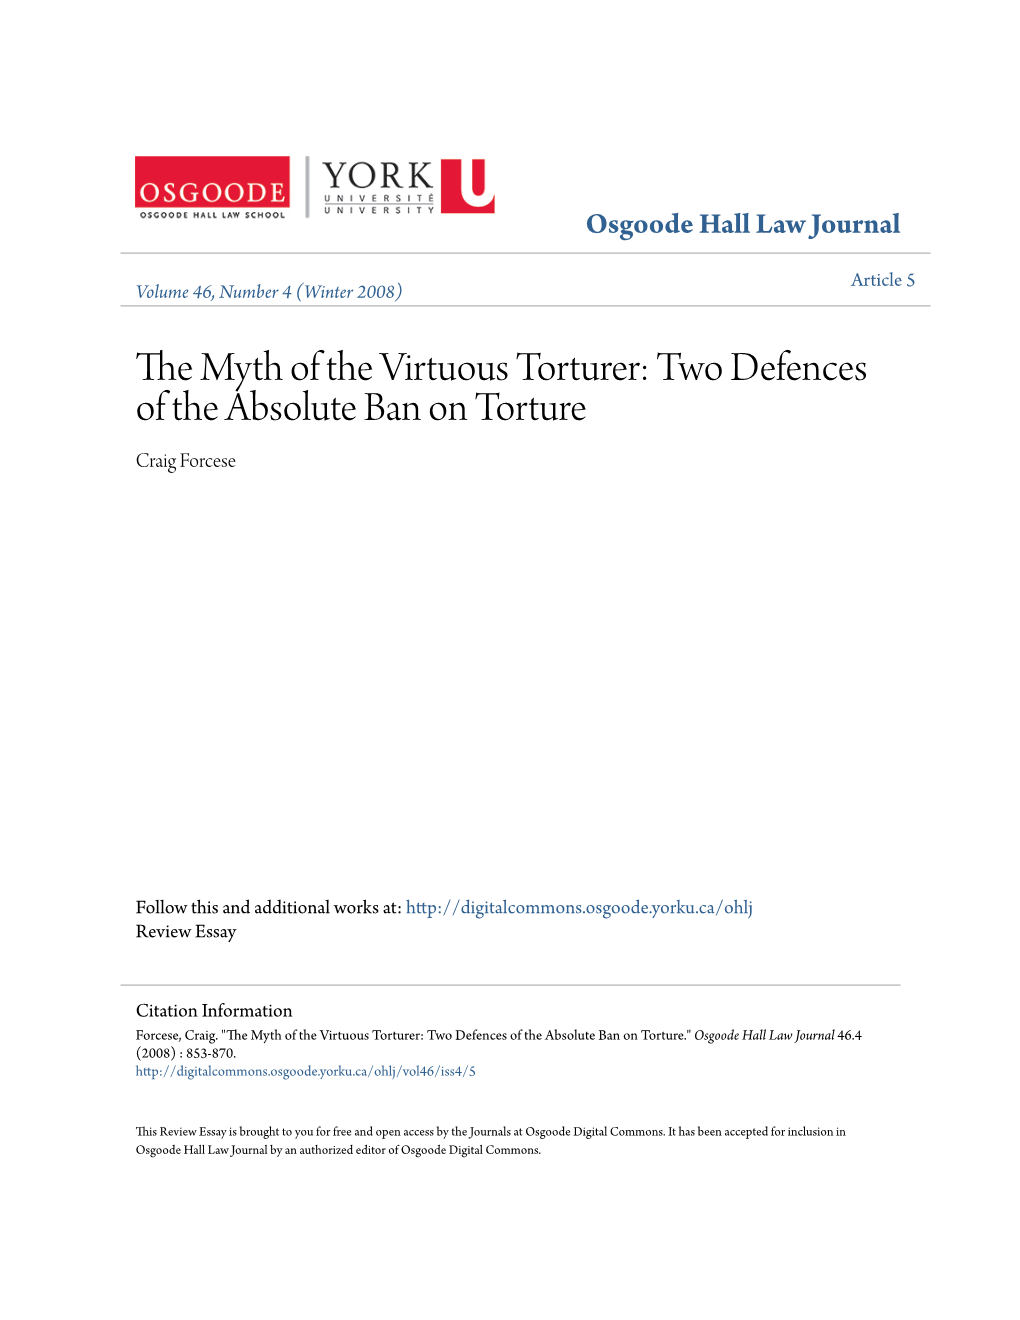 The Myth of the Virtuous Torturer: Two Defences of the Absolute Ban on Torture